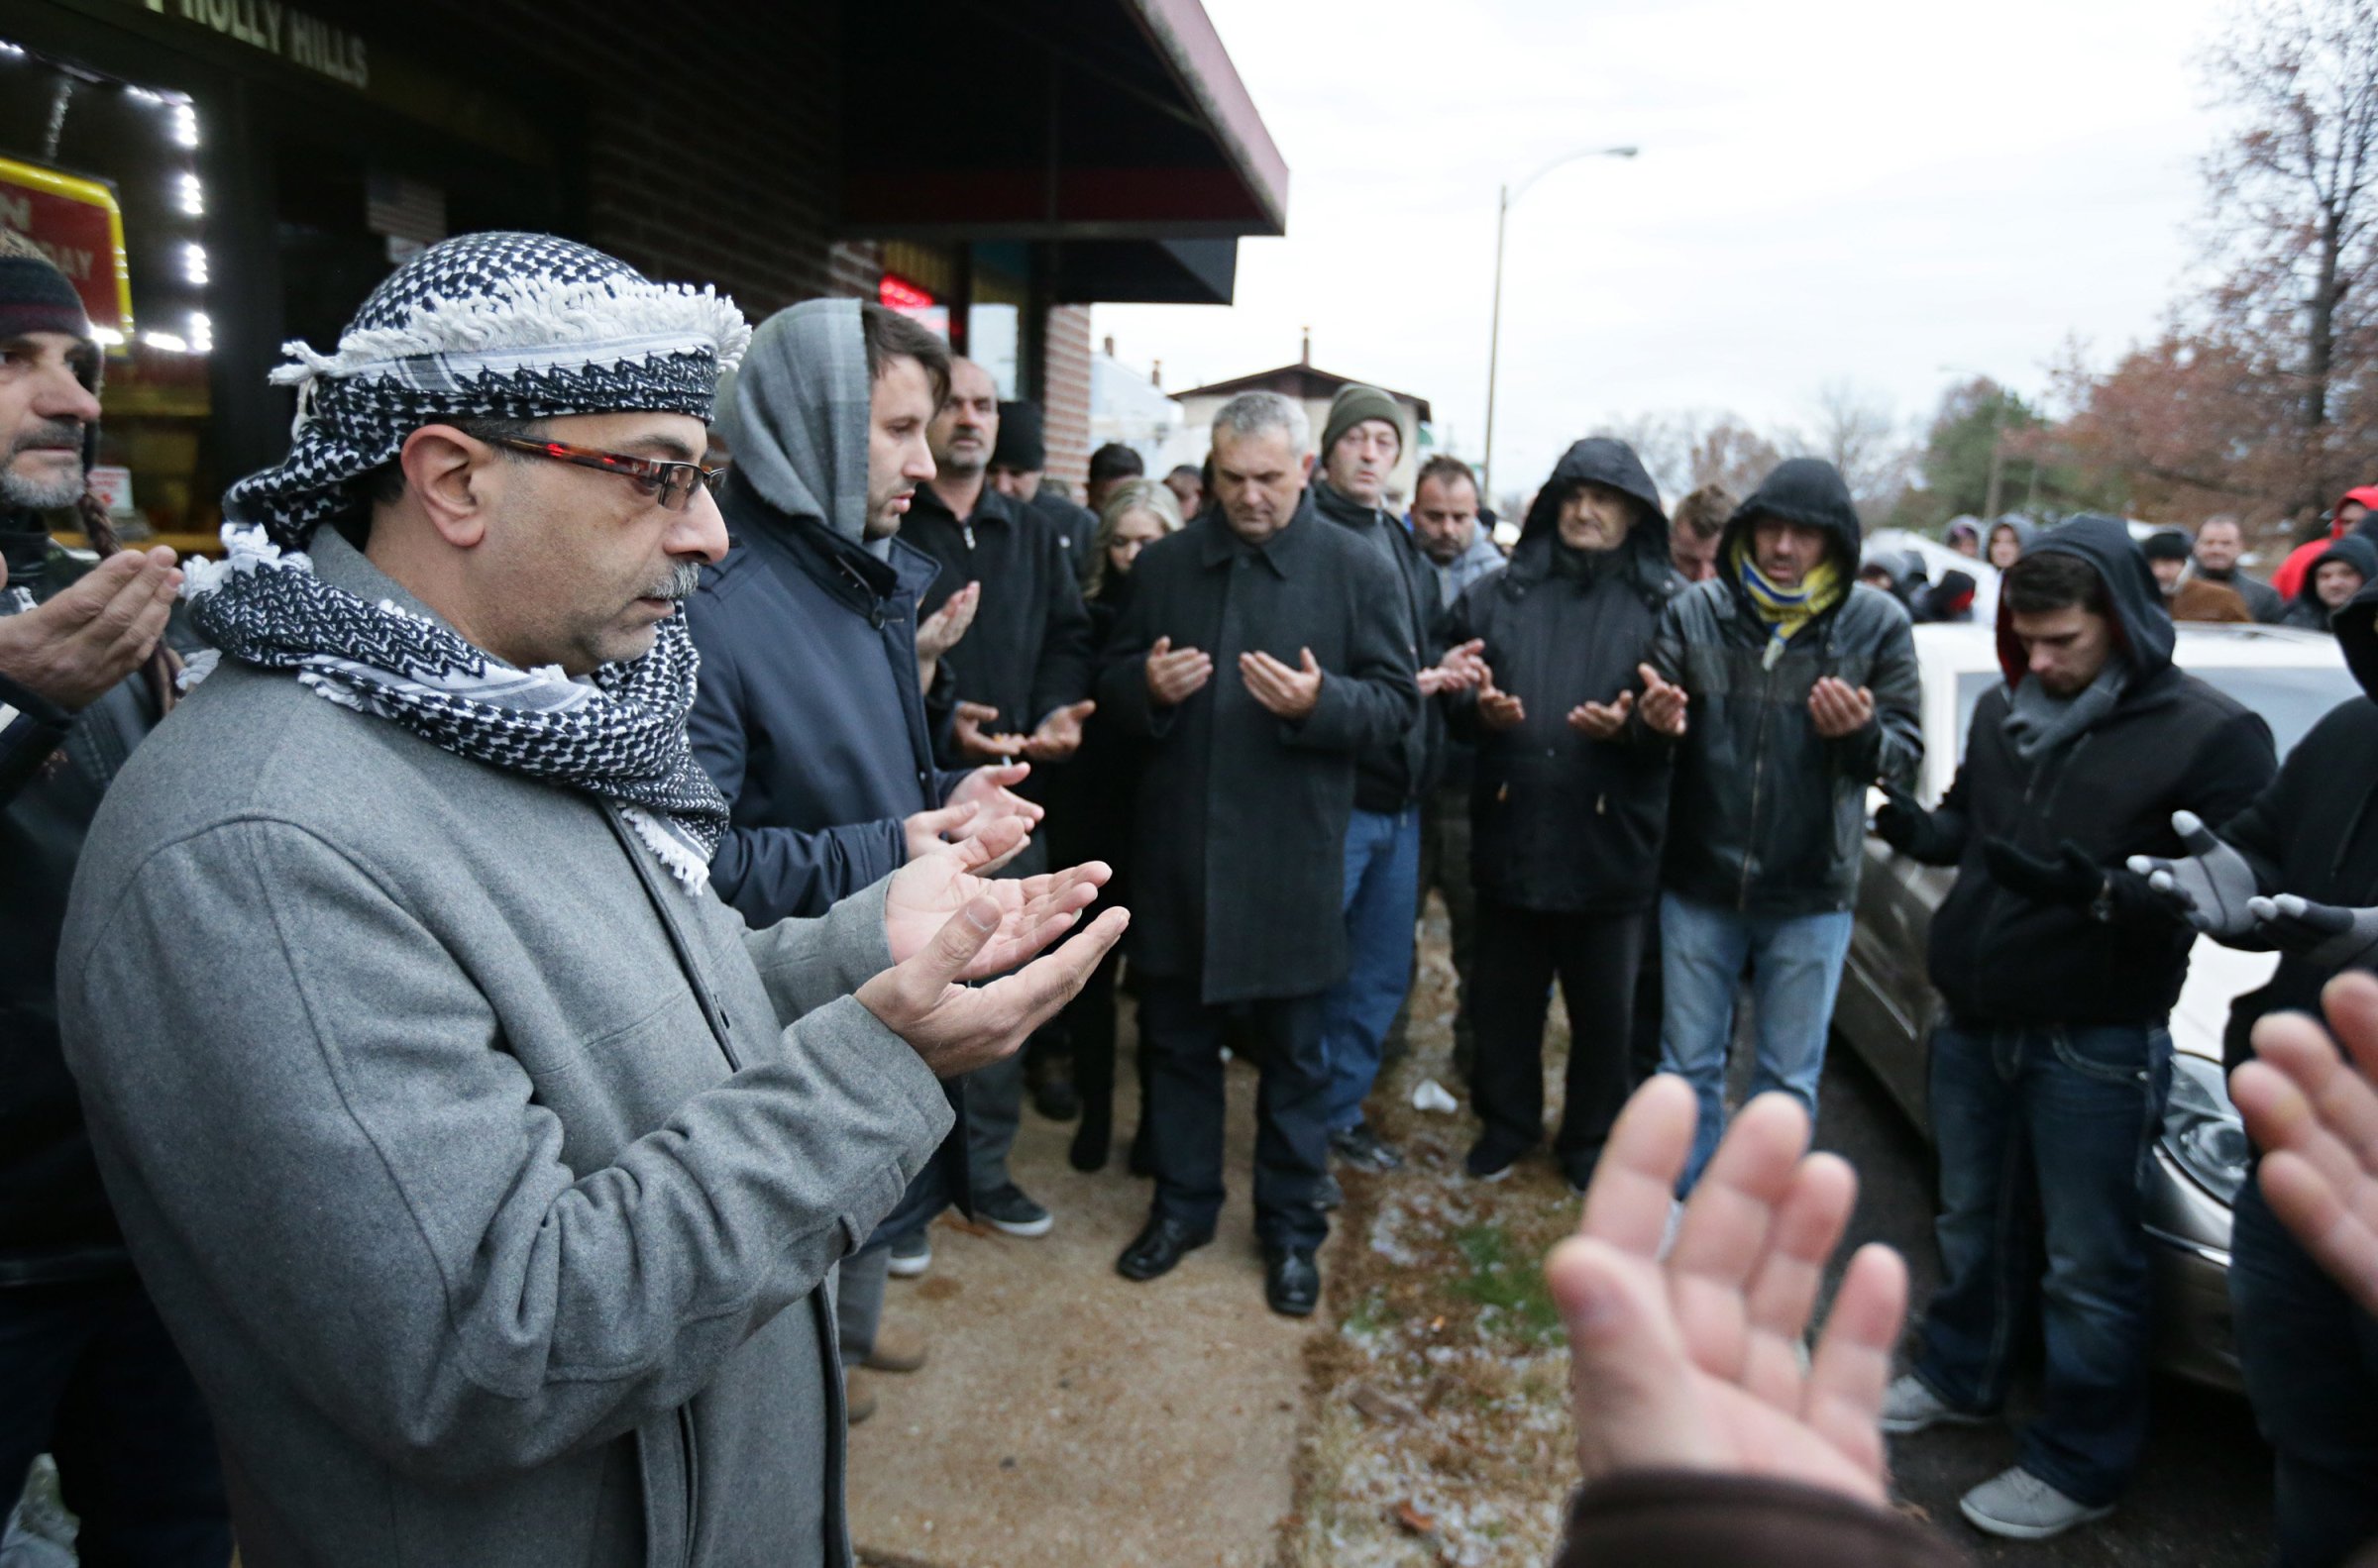 Zuhdi Masri, left, prays for murder victim Zemir Begic with a group of other Bosnians gathered on Holly Hills Avenue in St. Louis on Dec. 1, 2014.